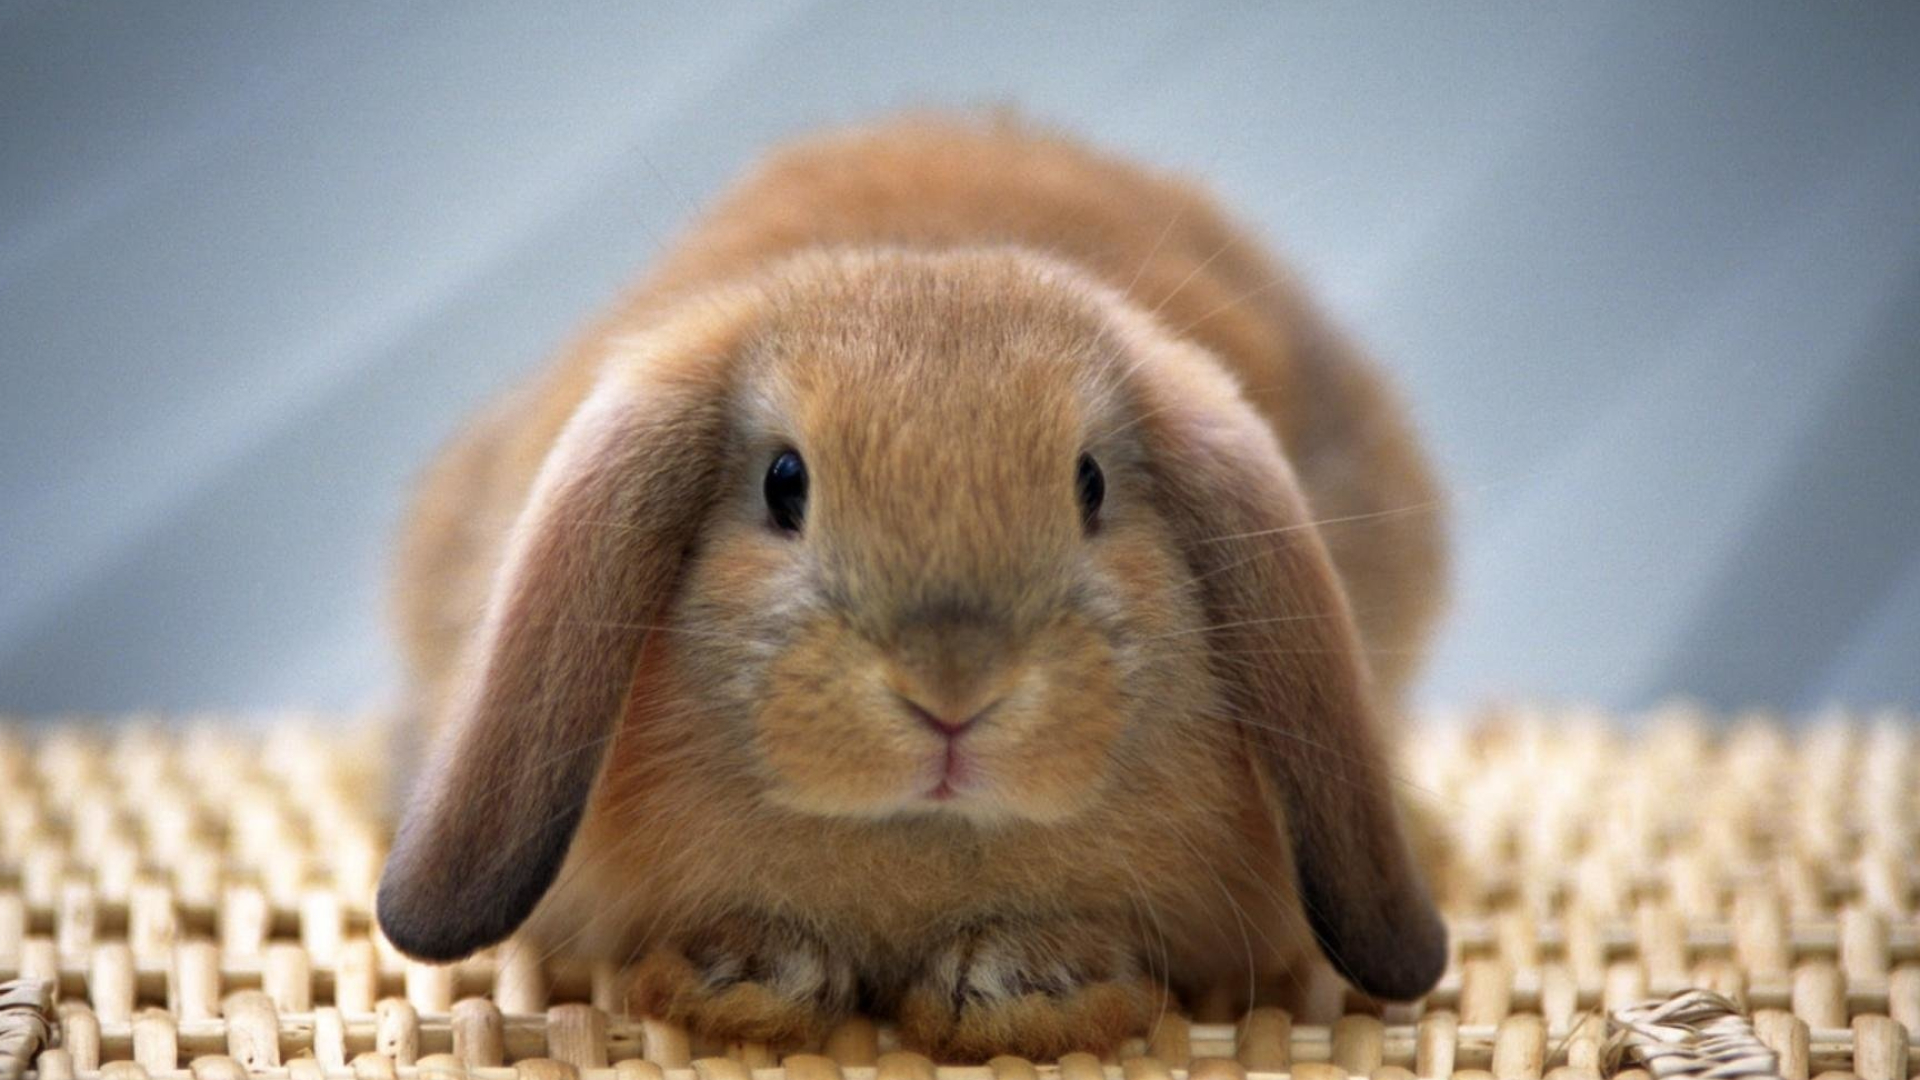 Bunny: One of the smallest lop-eared breeds, Holland Lops. 1920x1080 Full HD Wallpaper.